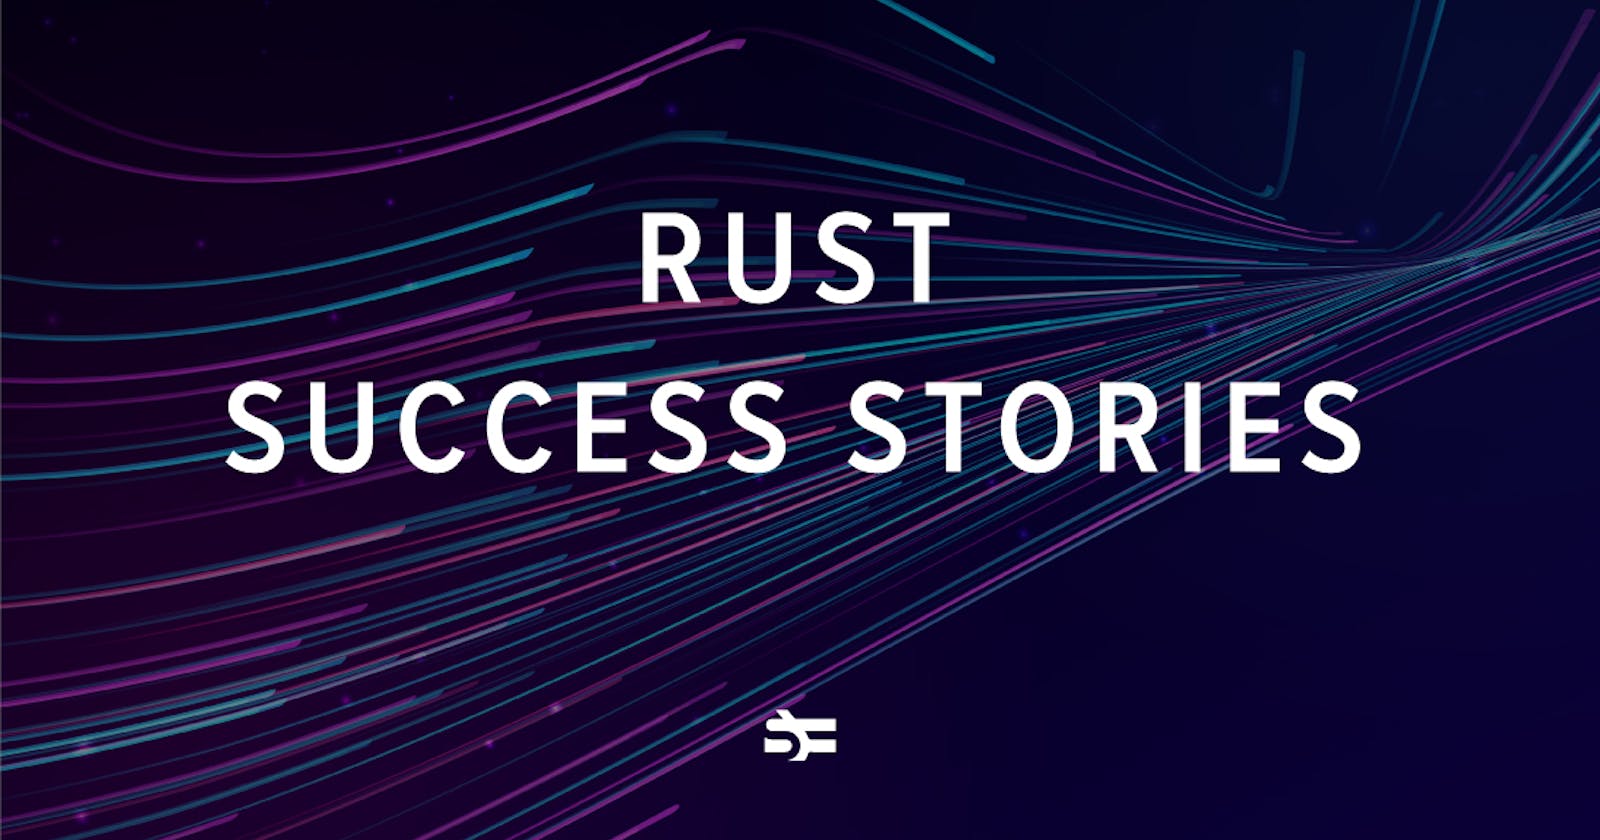 9 Companies That Use Rust in Production